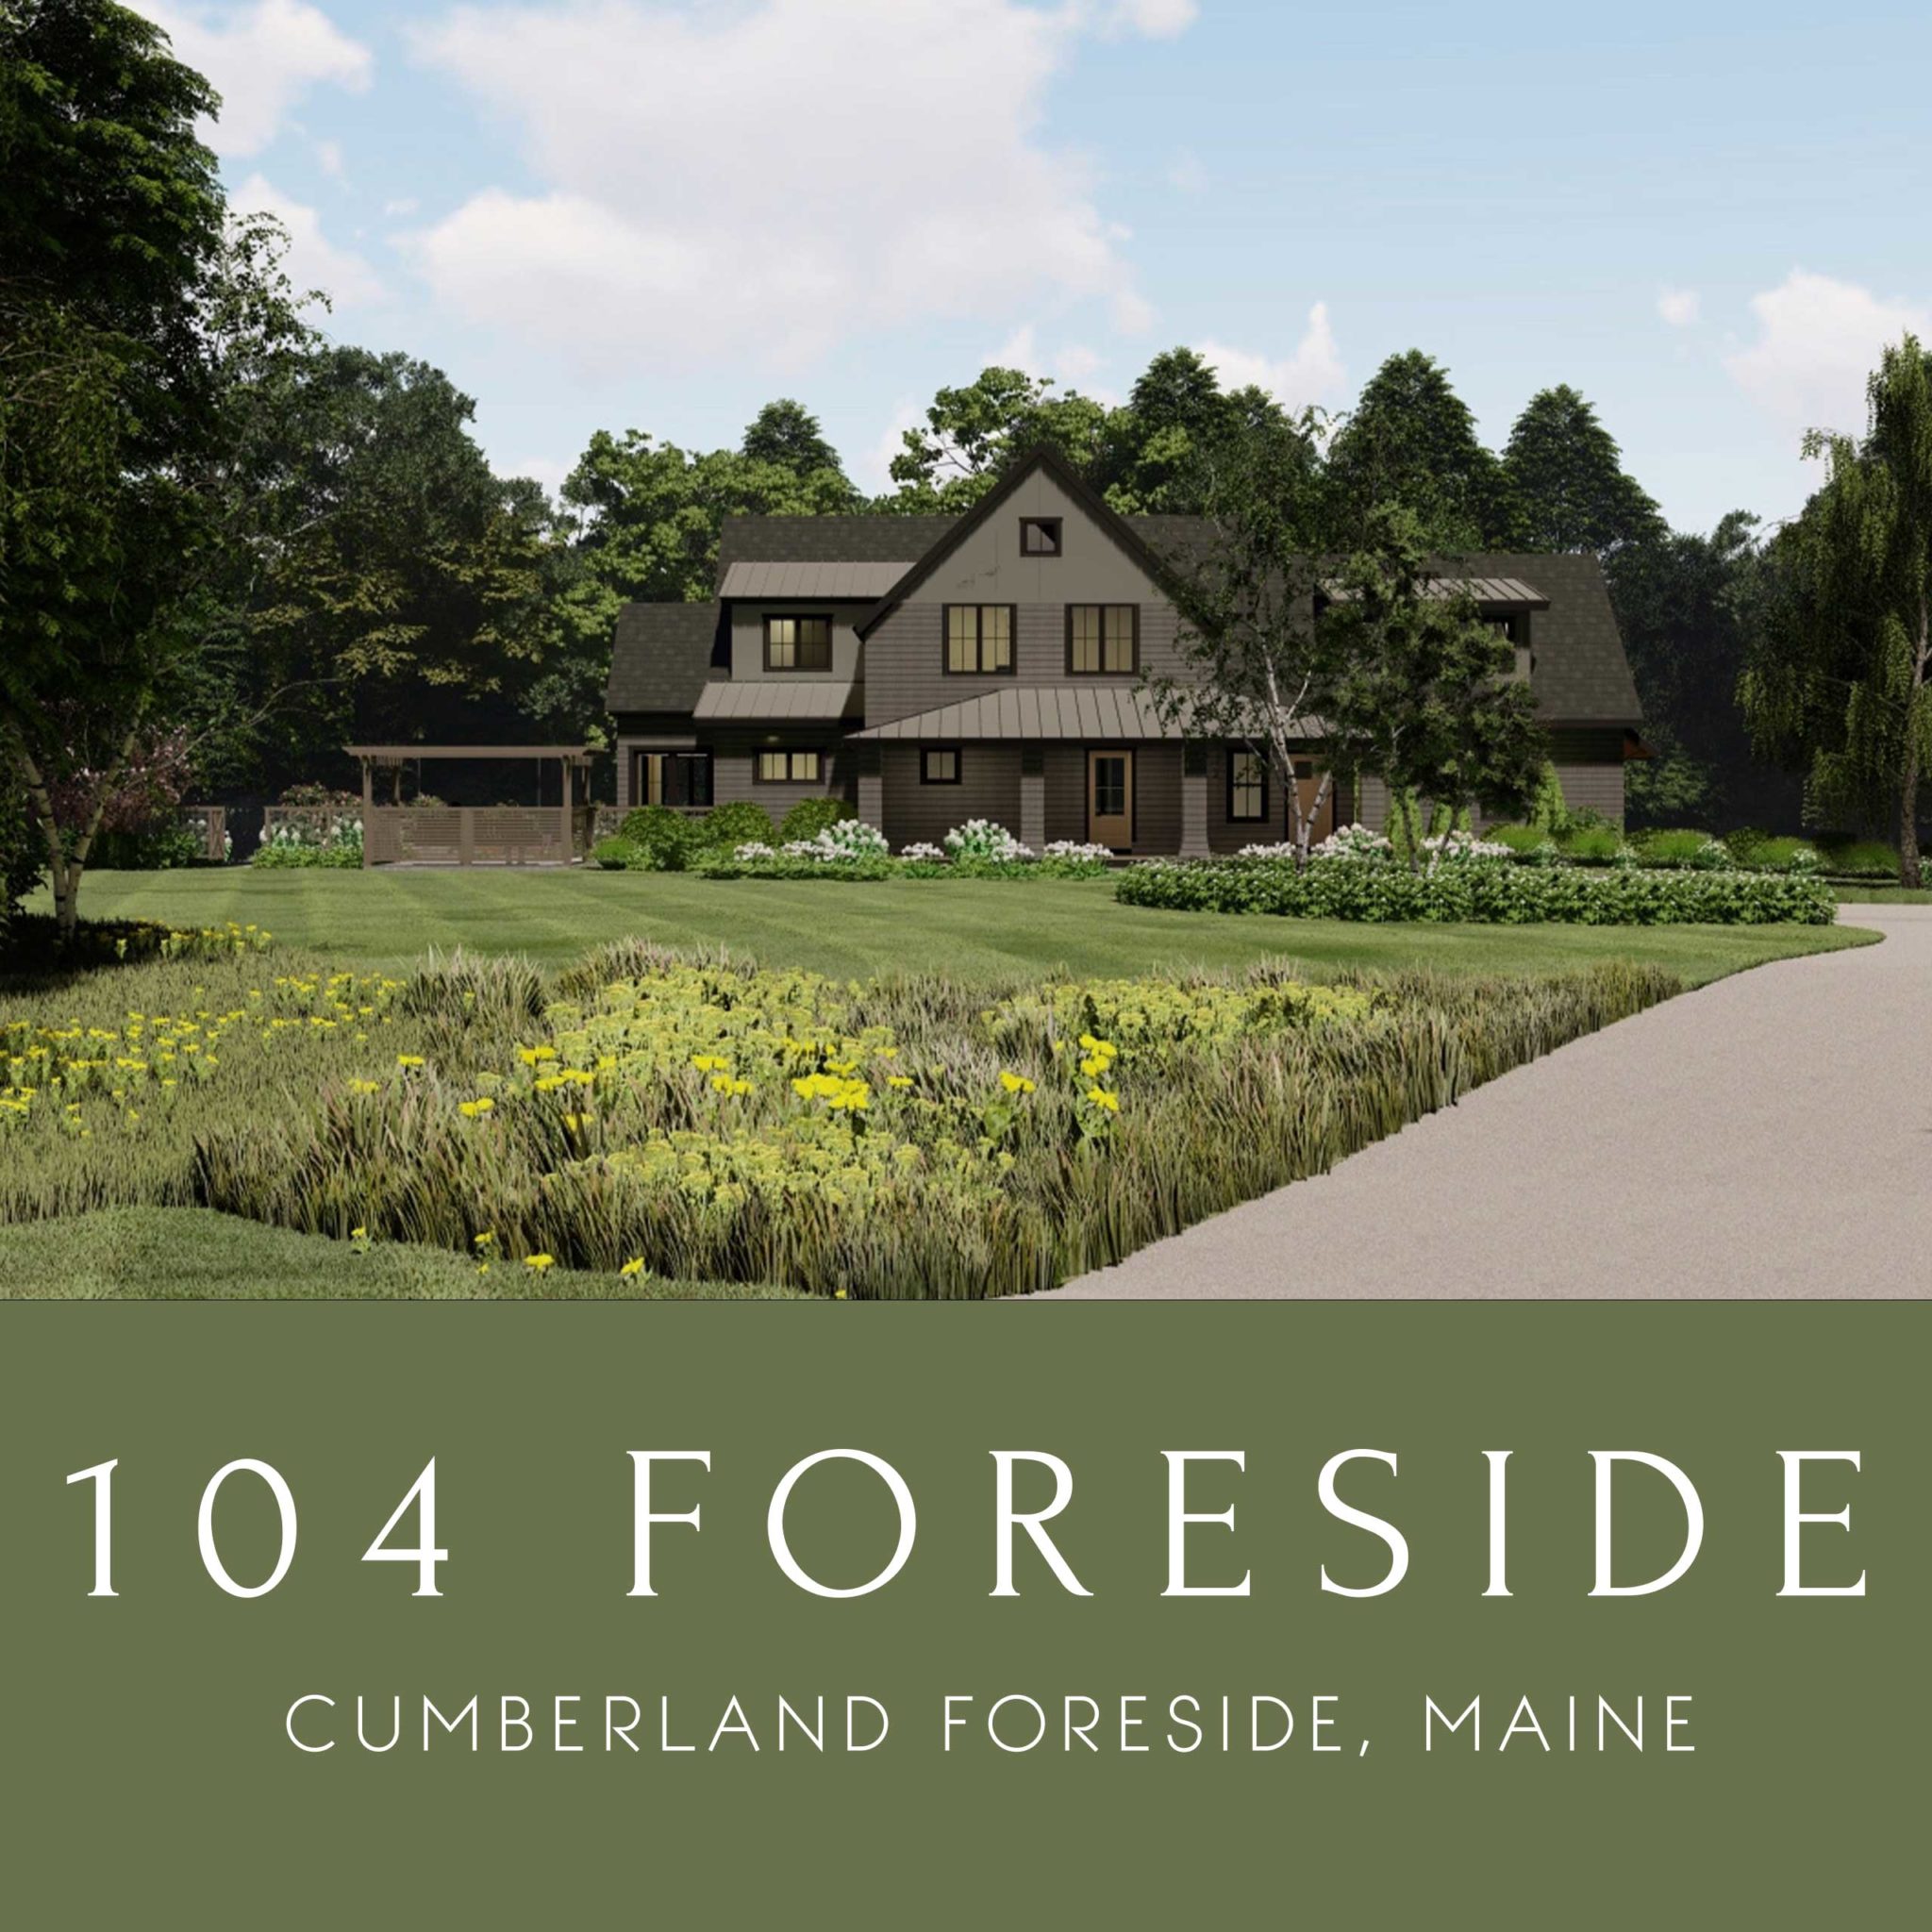 104 Foreside, Cumberland Foreside, Maine